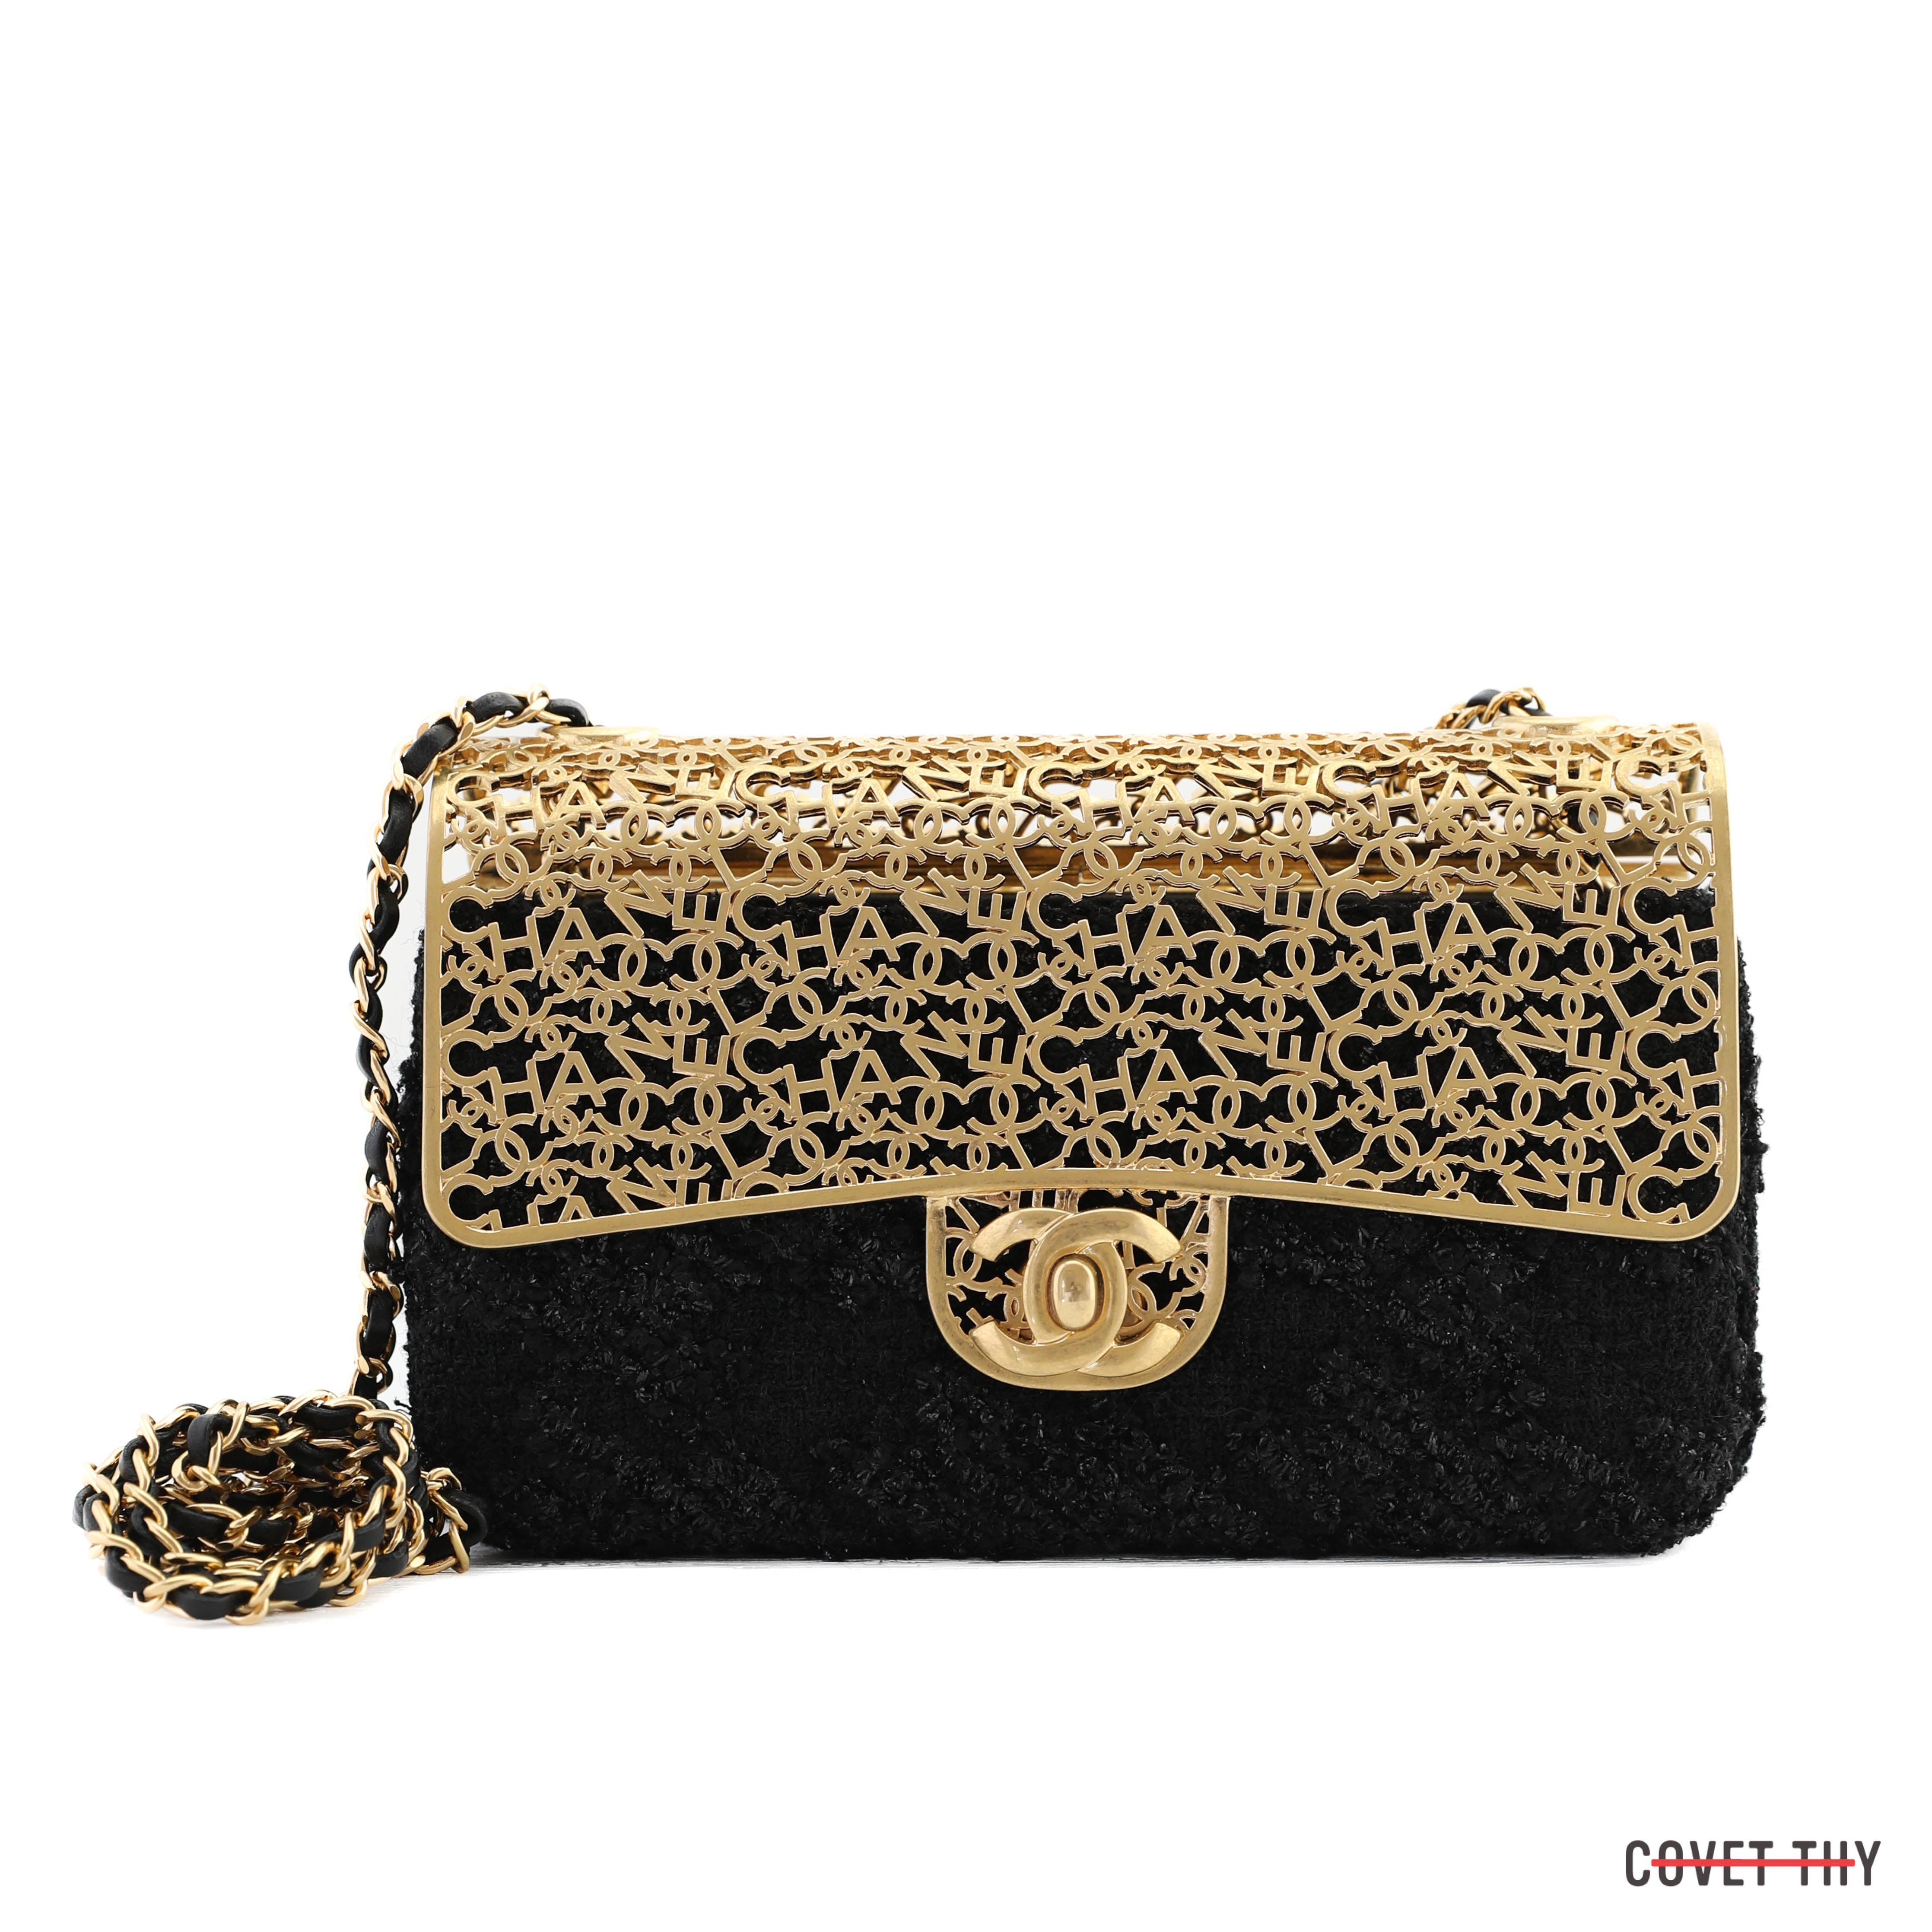 Auth Chanel Tweed Chain Shoulder Cross Body Bag Gold Fittings Leather Strap